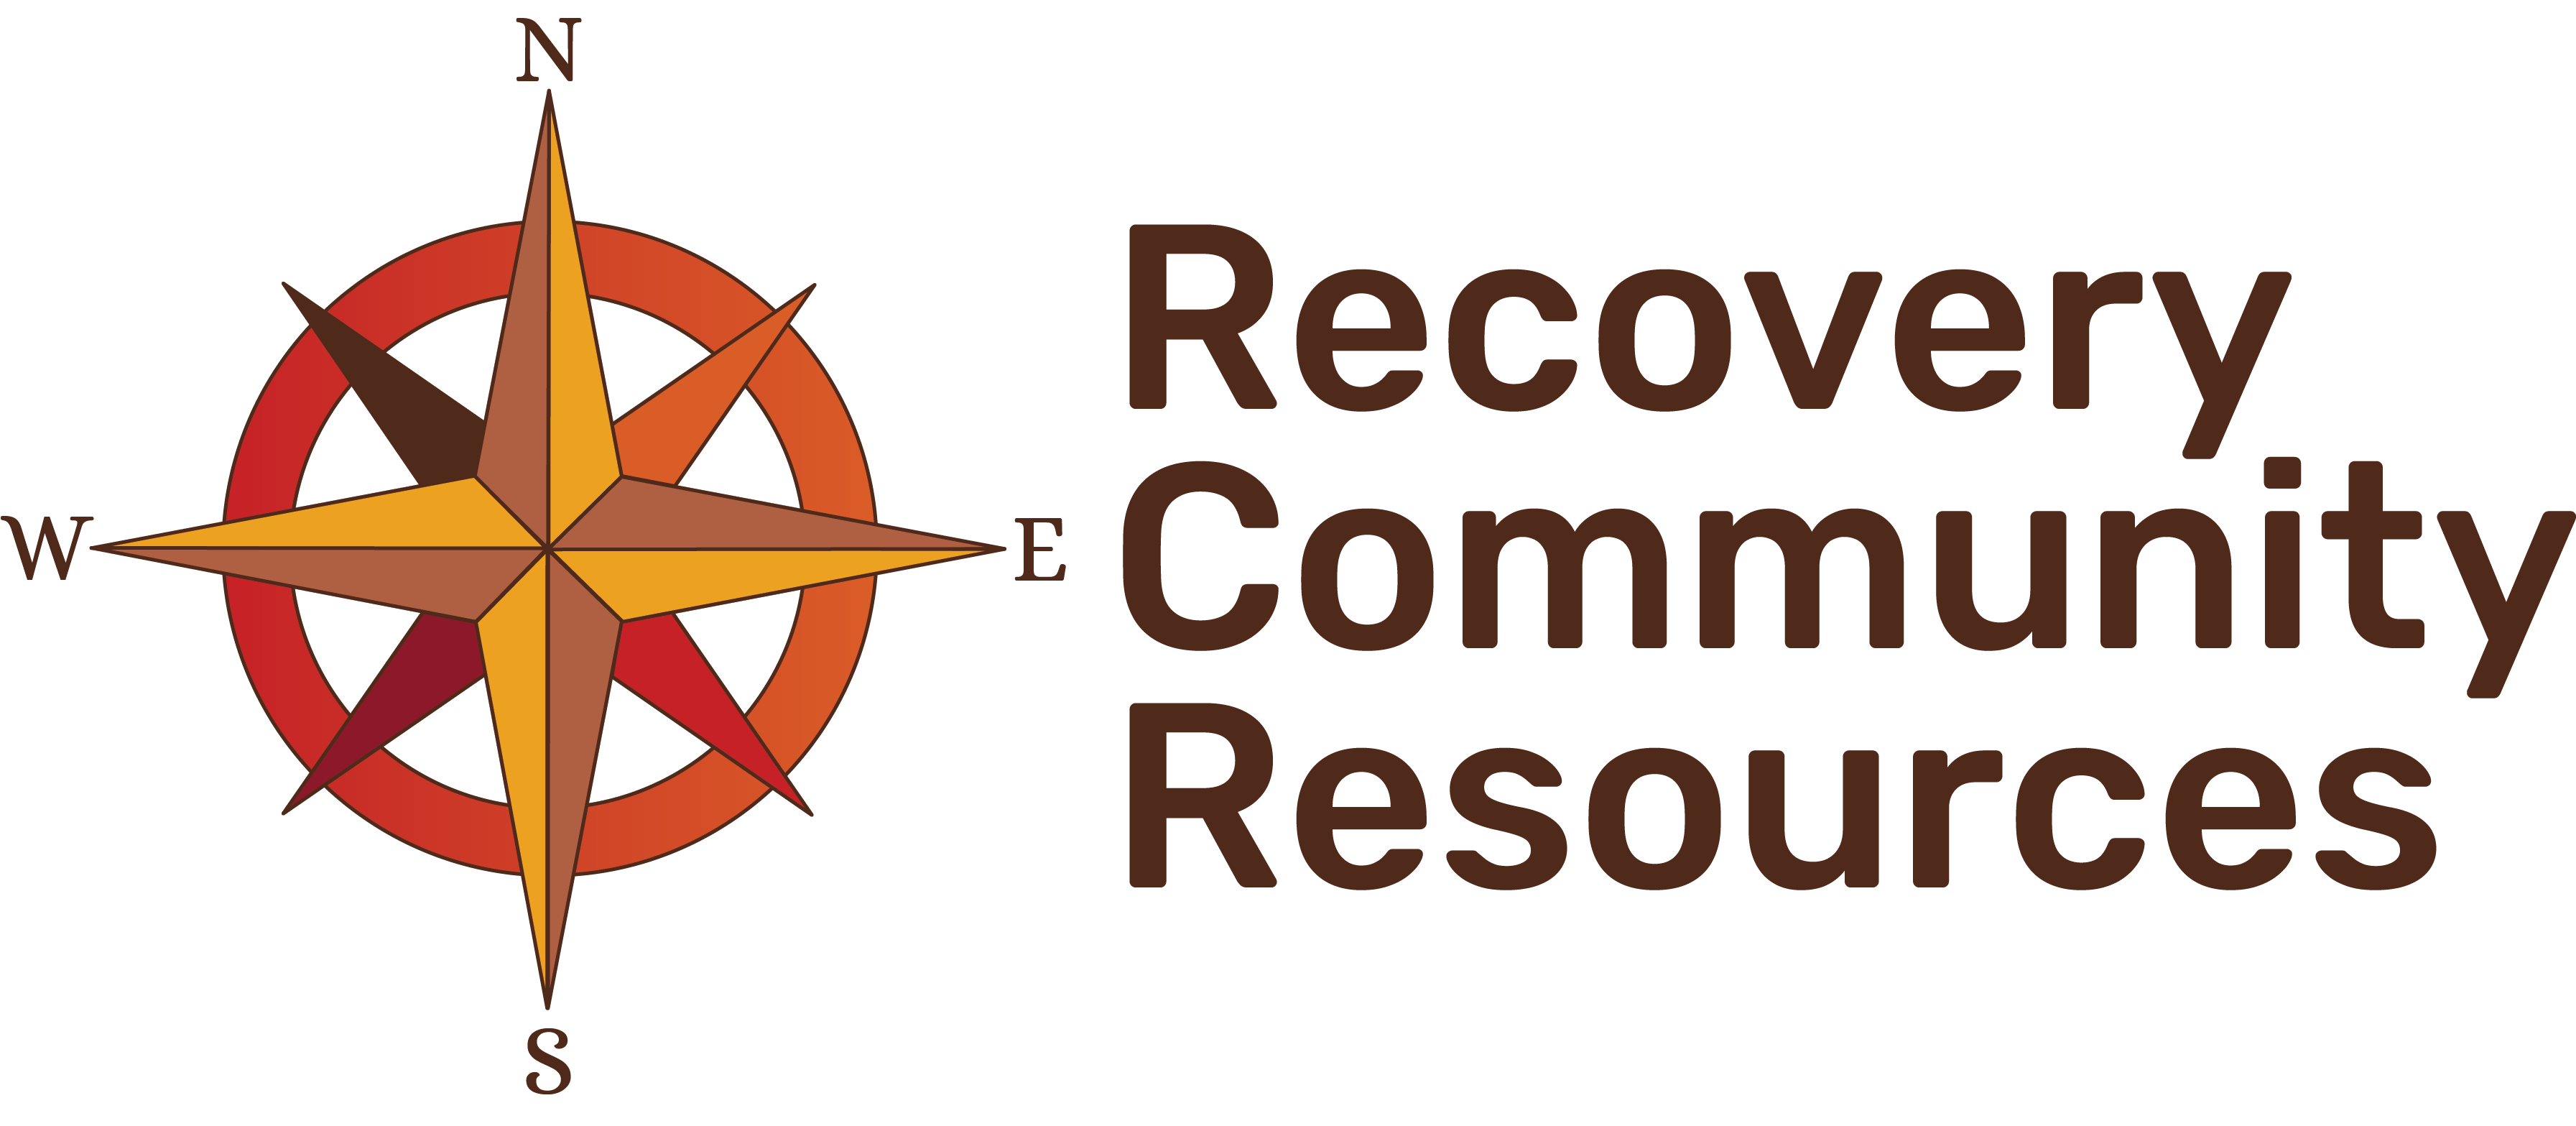 Recovery Community Resources Logo